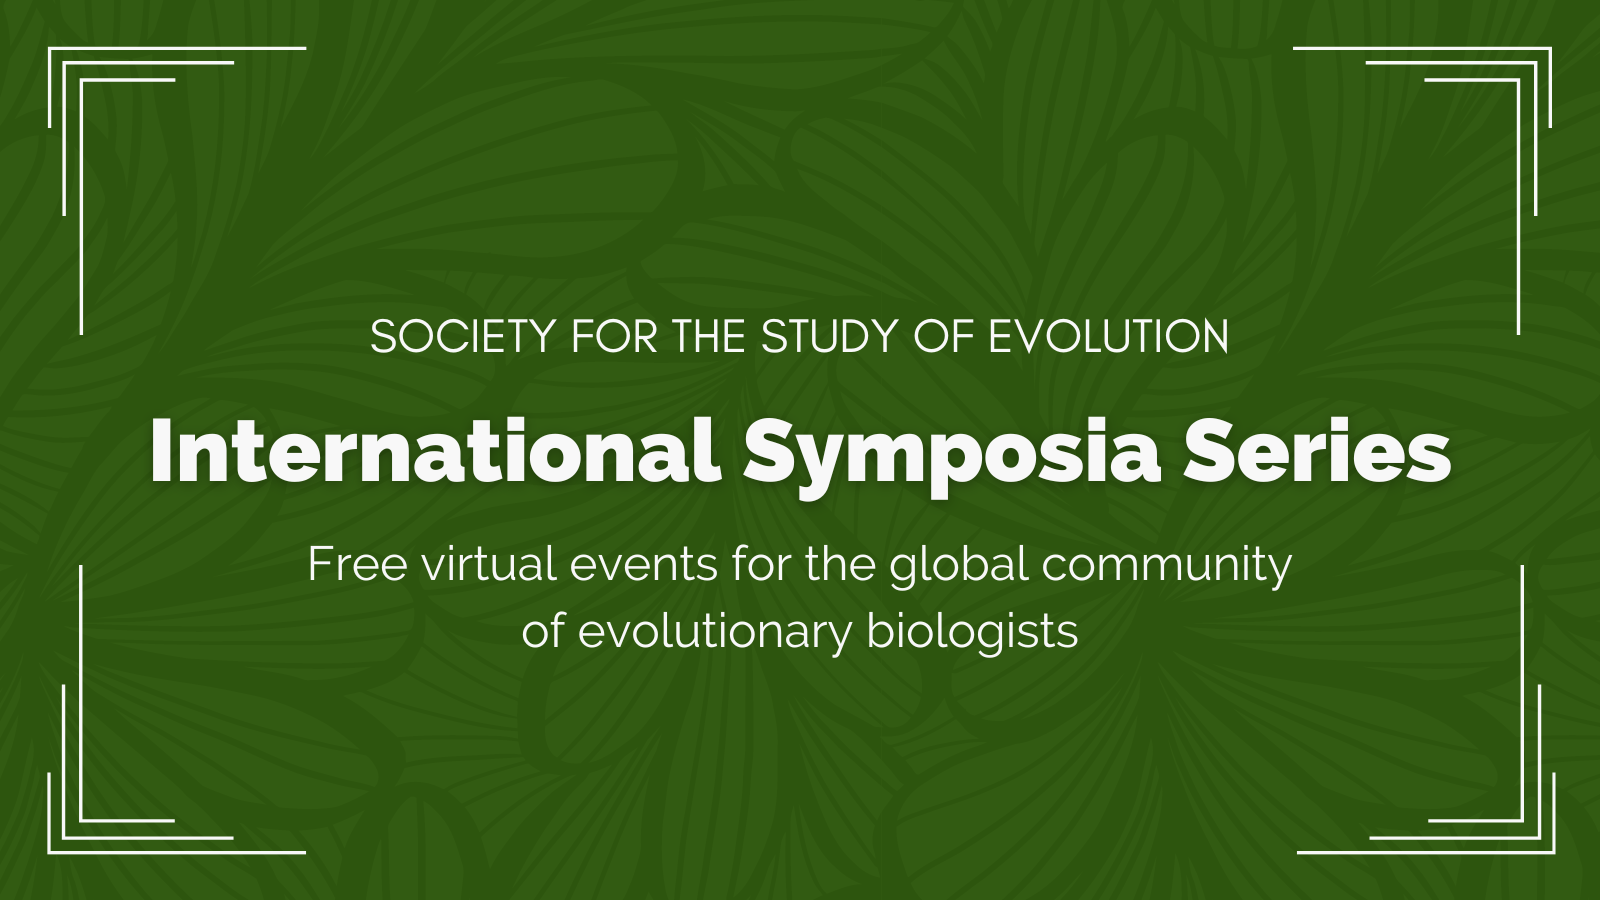 Text: Society for the Study of Evolution International Symposia Series, Free virtual events for the global community of Evolutionary Biologists.